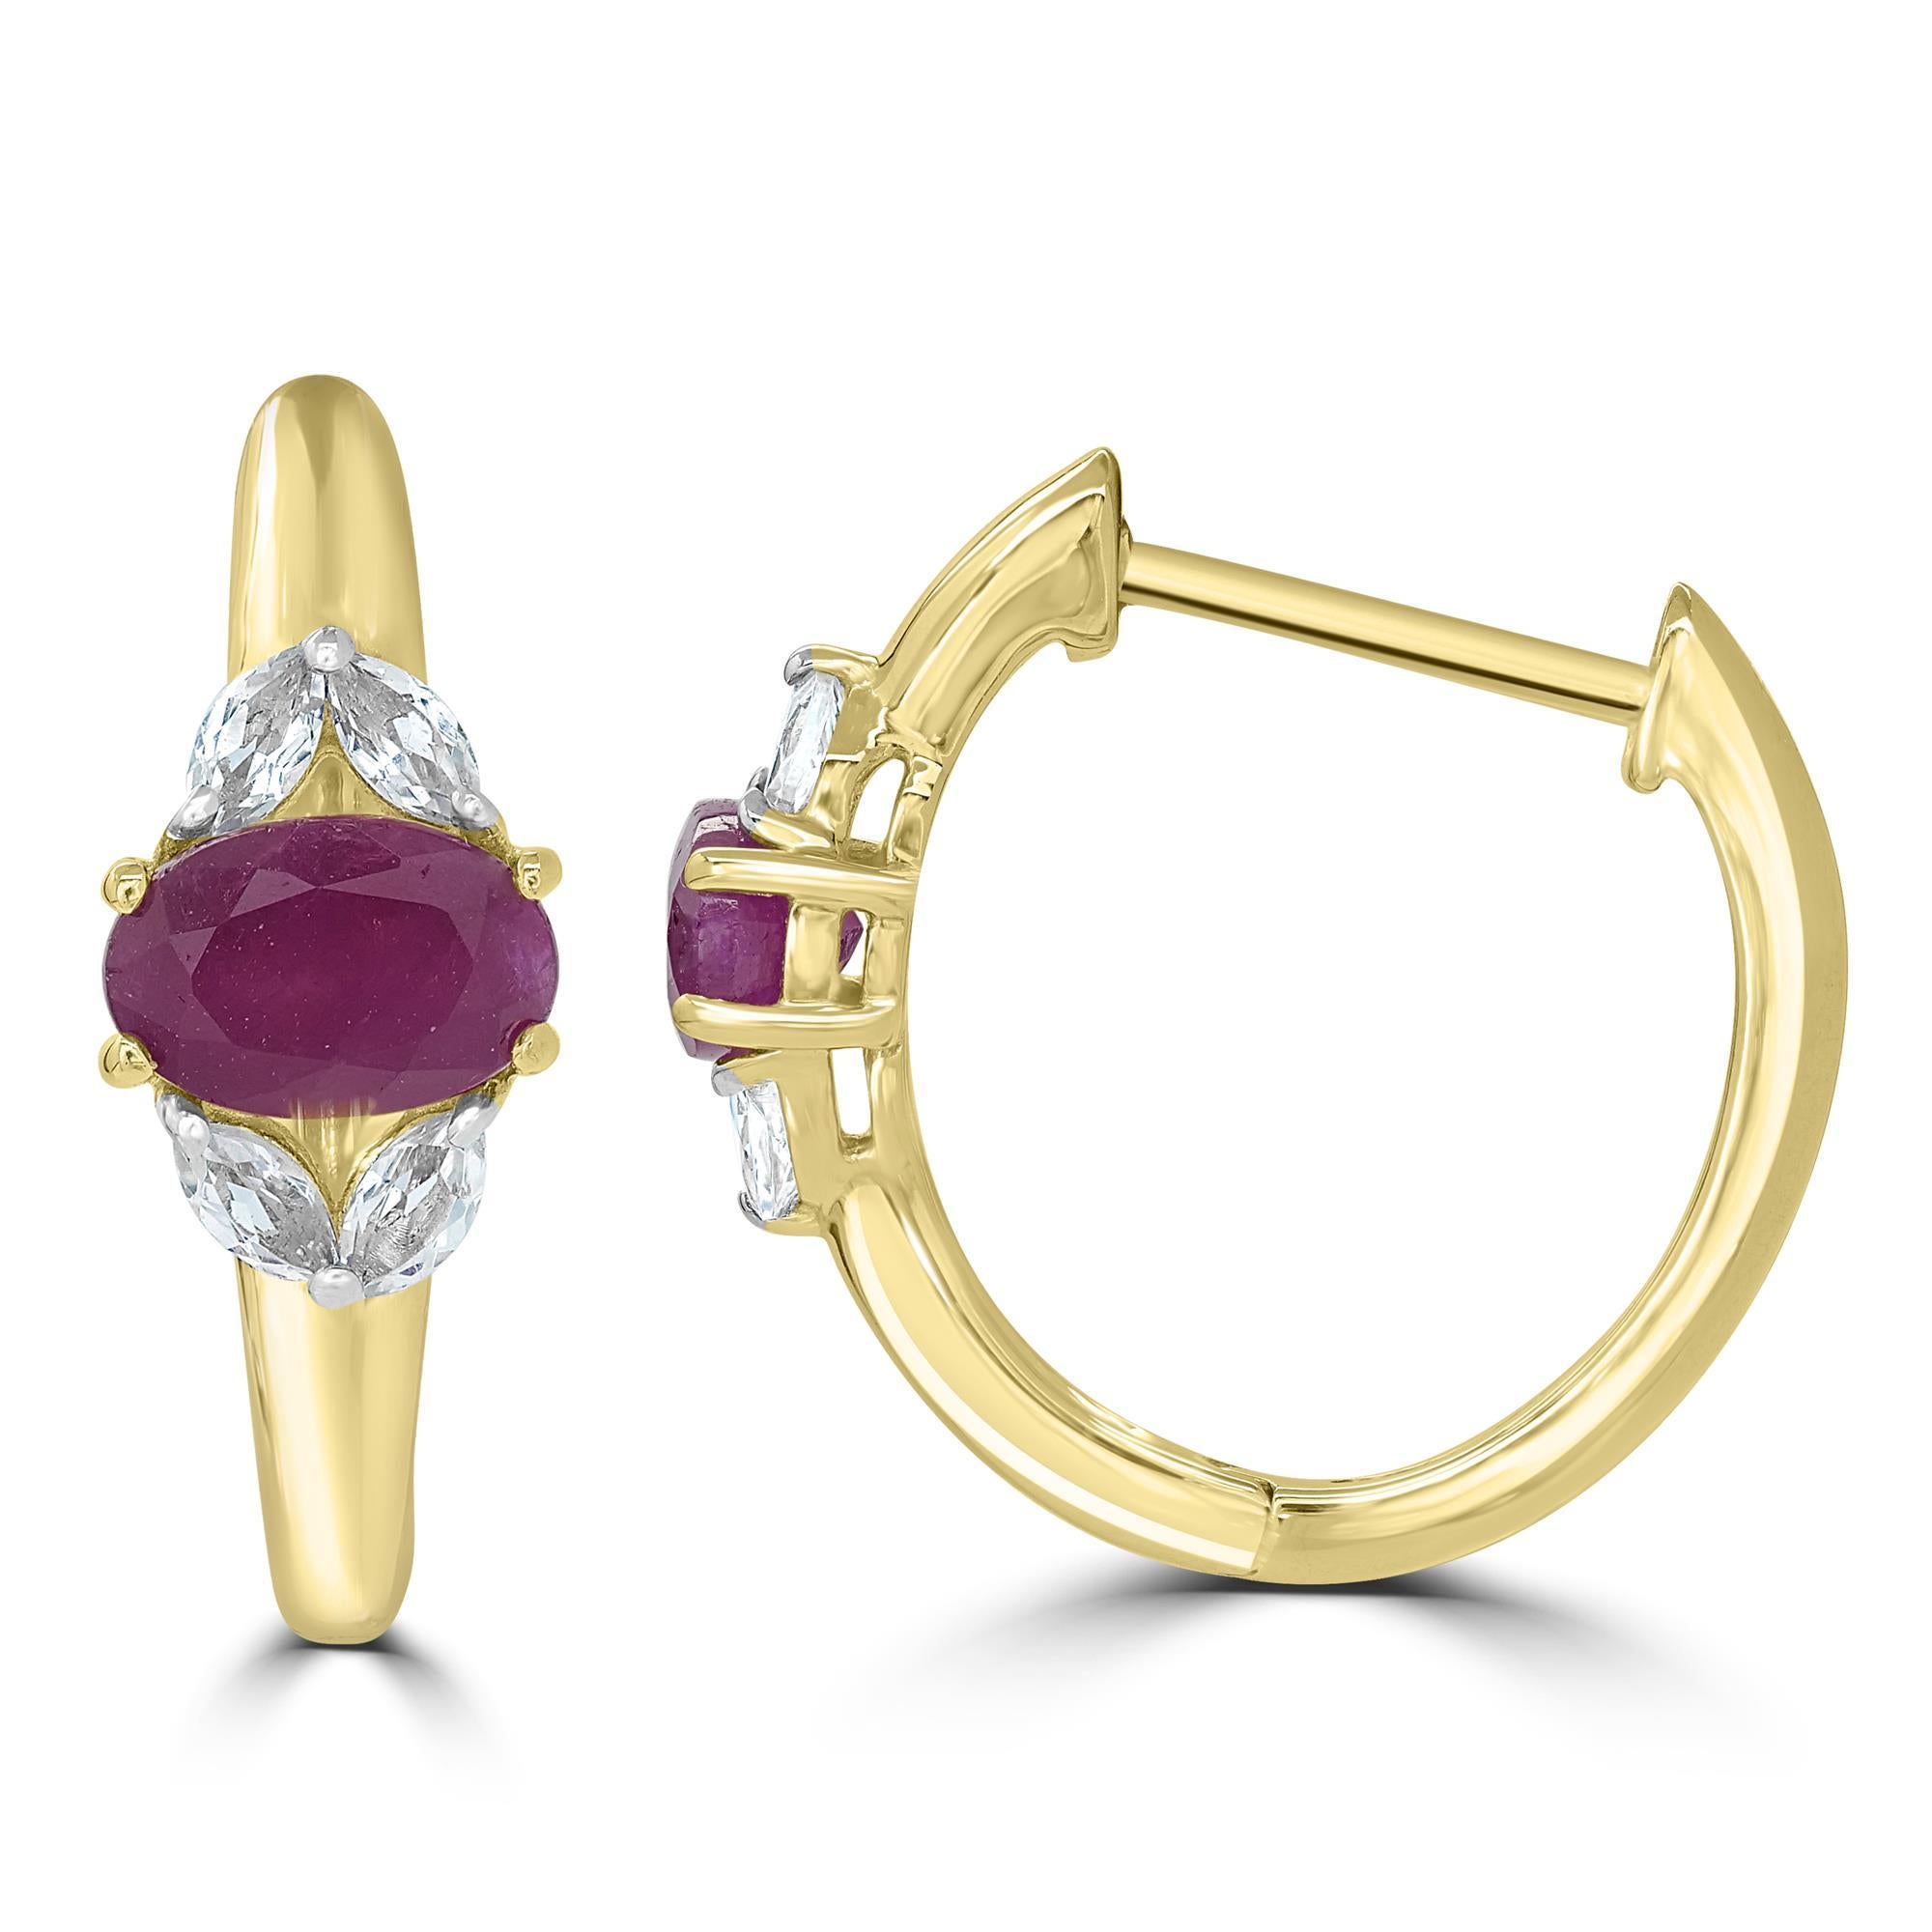 Contemporary Gemistry 1.6 Carats Oval Ruby Hoop Earrings in 14k Yellow Gold